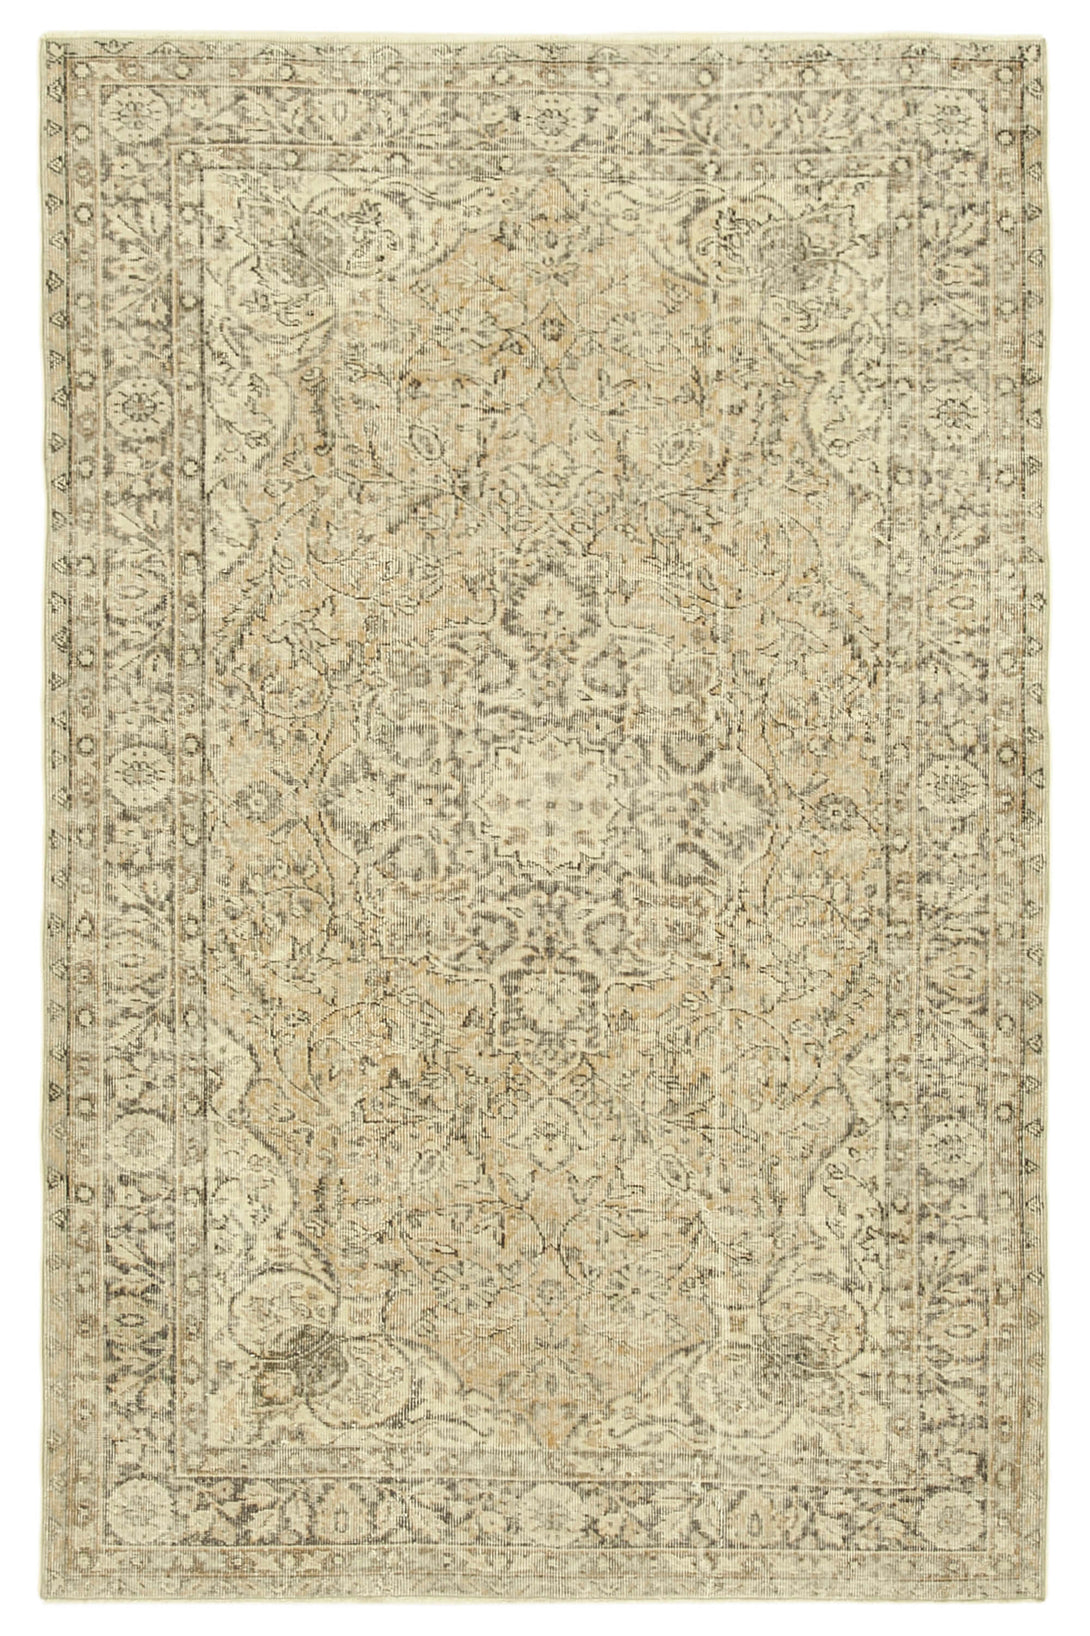 Handmade White Wash Area Rug > Design# OL-AC-39012 > Size: 5'-6" x 8'-5", Carpet Culture Rugs, Handmade Rugs, NYC Rugs, New Rugs, Shop Rugs, Rug Store, Outlet Rugs, SoHo Rugs, Rugs in USA